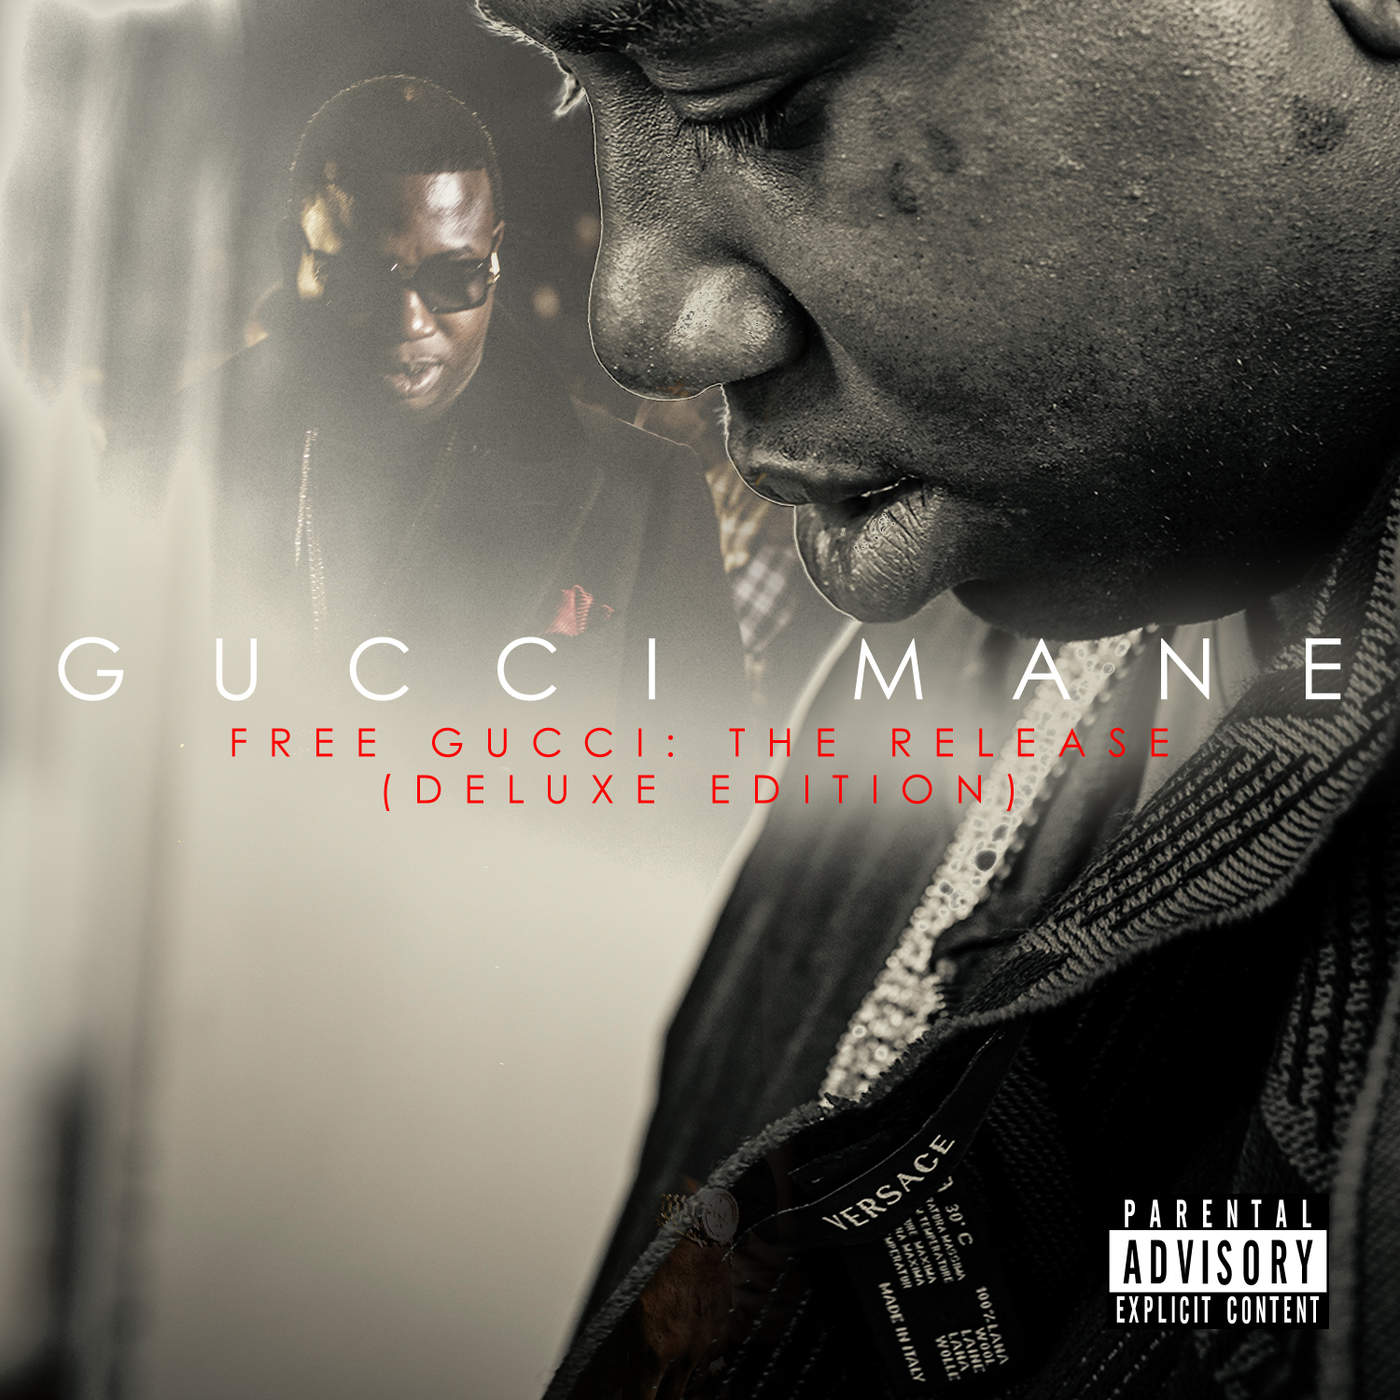 Free Gucci: The Release (Deluxe Edition) (Gucci Mane) - GetSongBPM